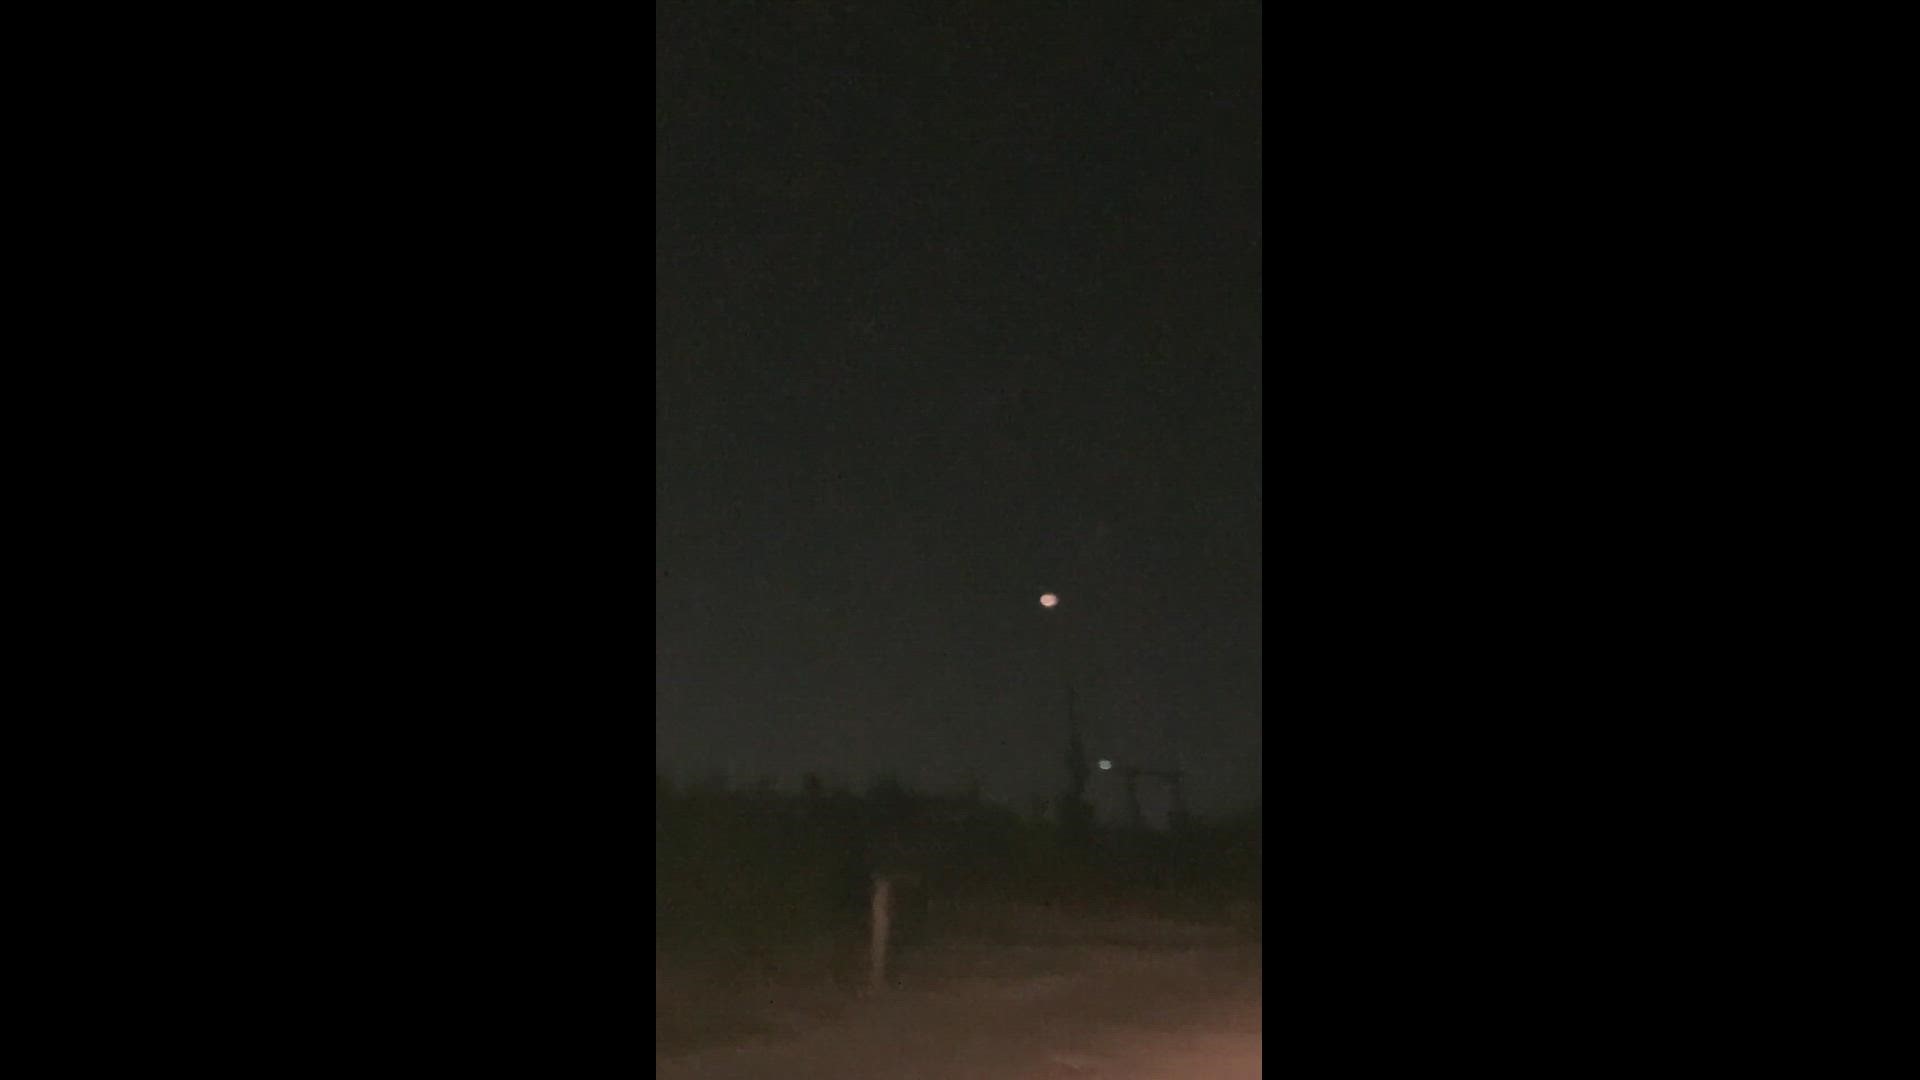 This went on for 3-4 minutes Friday night. The white light is a helicopter.
Credit: Rachel V